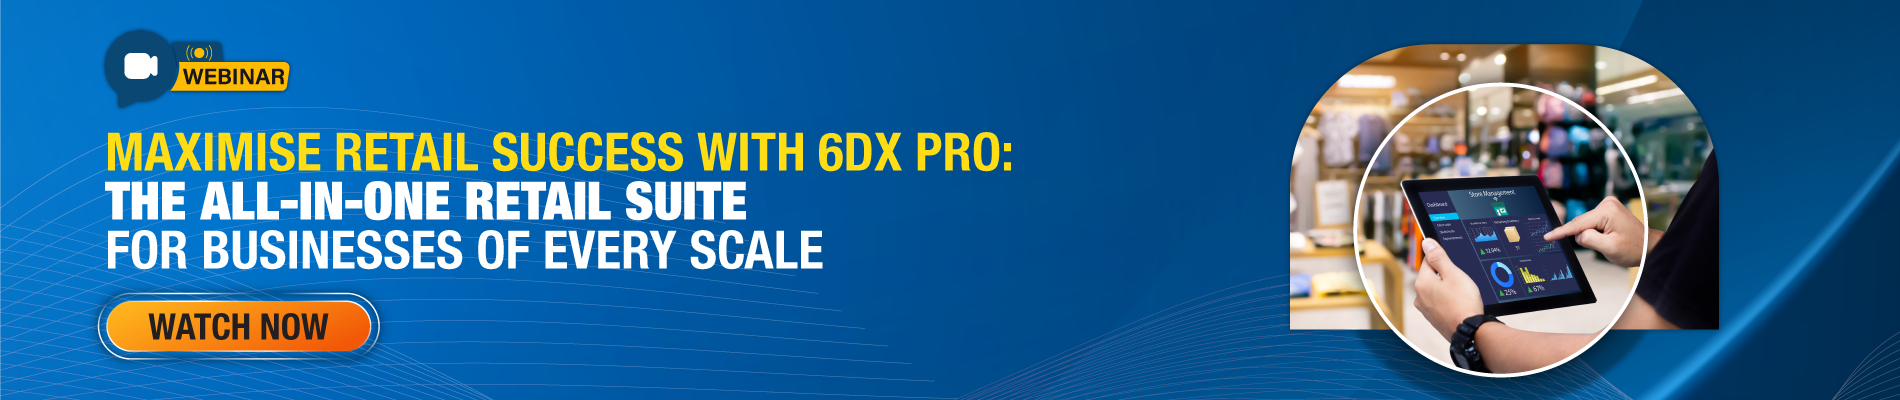 Maximise Retail Success with 6DX Pro The All-in-One Retail Suite for Businesses of Every Scale